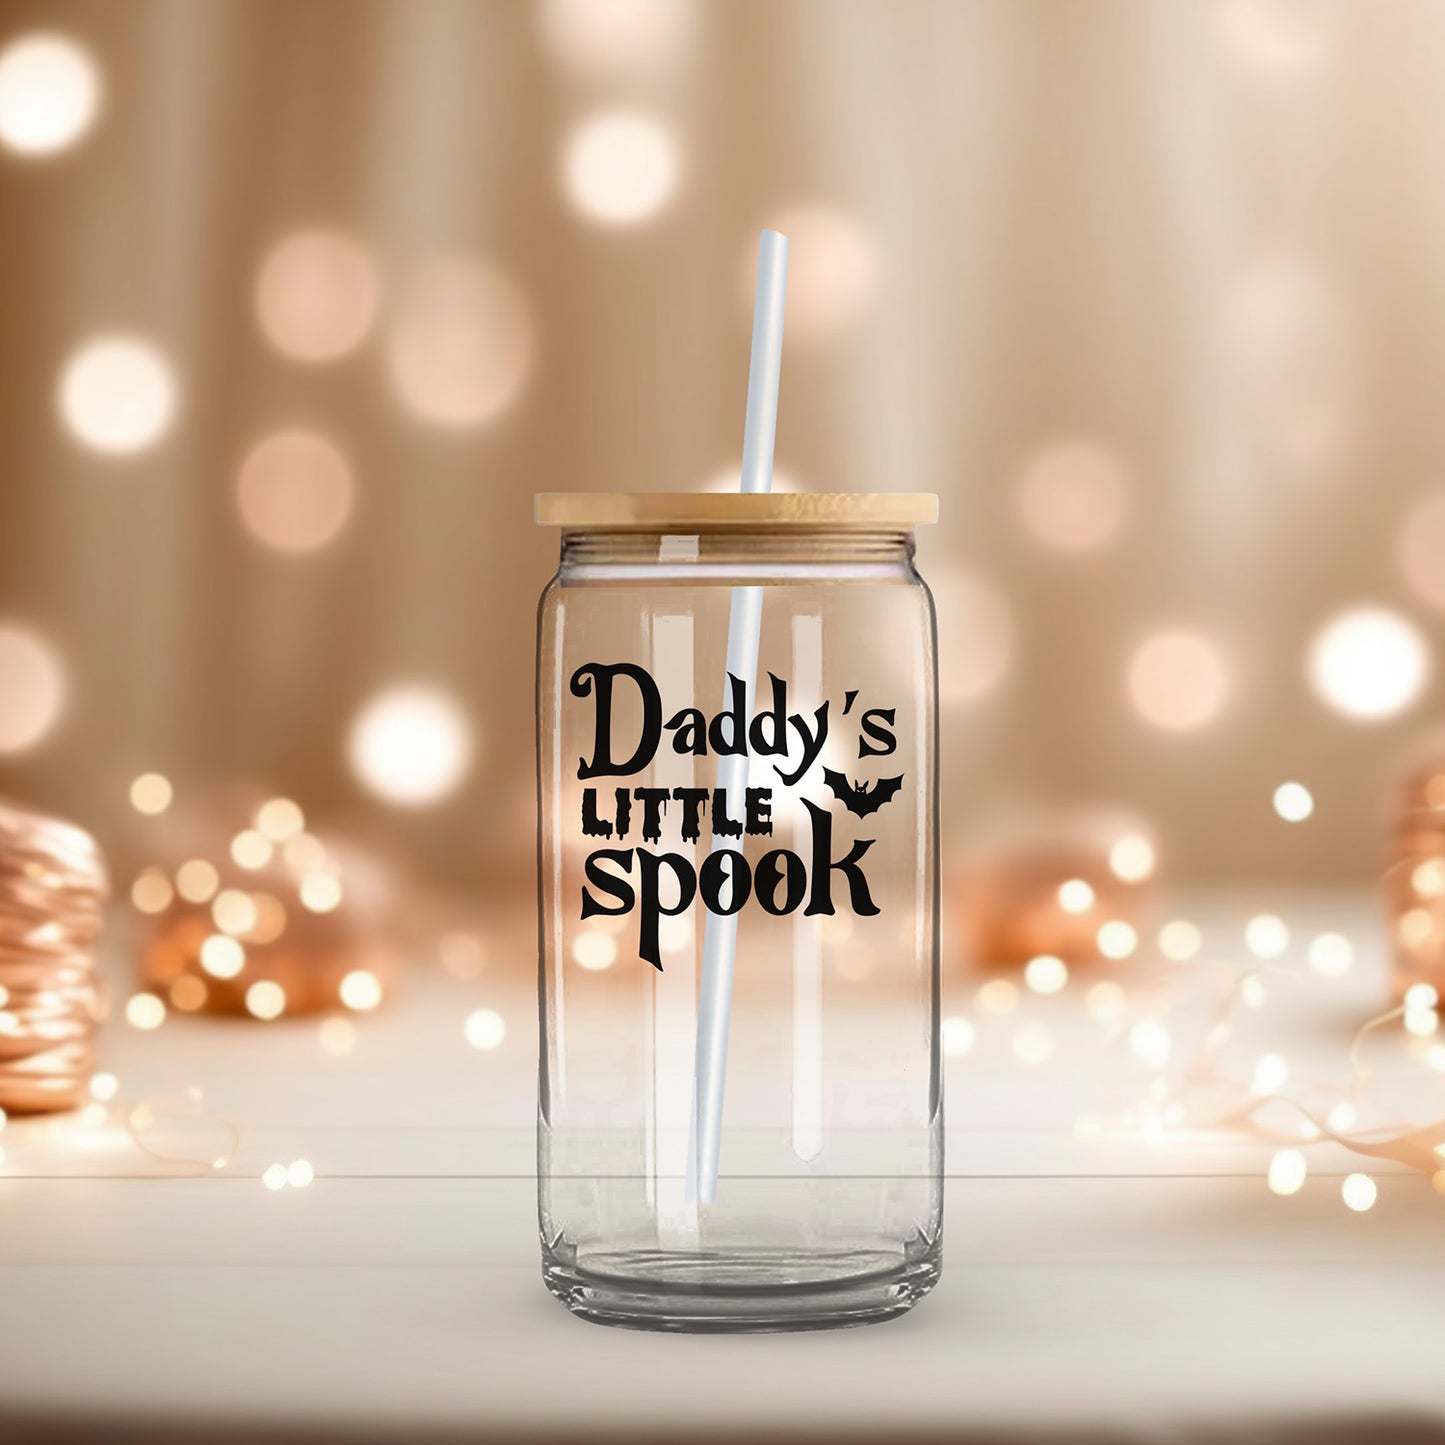 "Daddy's Little Spook" Graphic